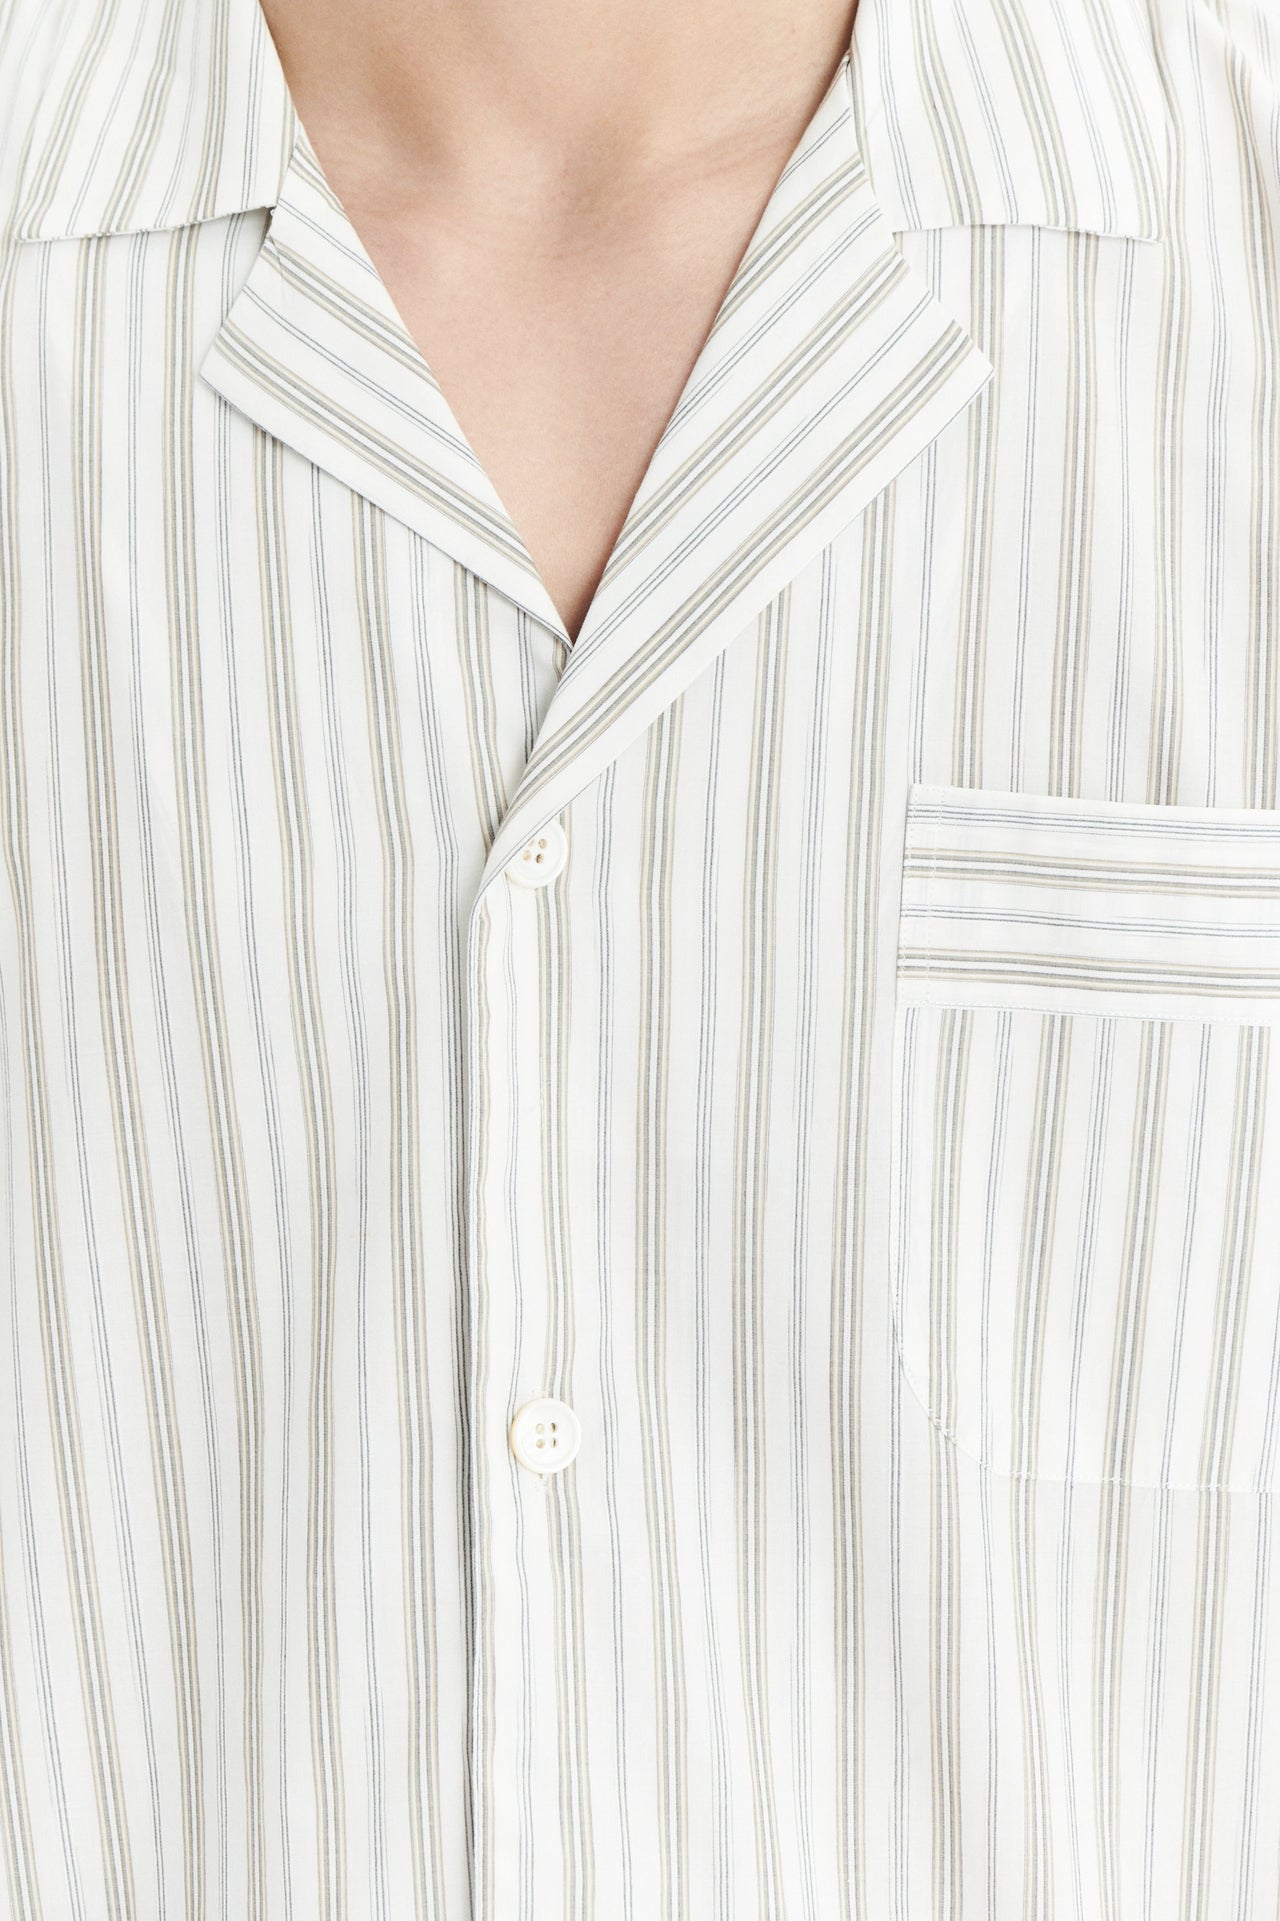 Pyjama House Shirt in a Cream and Beige Striped Excellent Italian Cotton